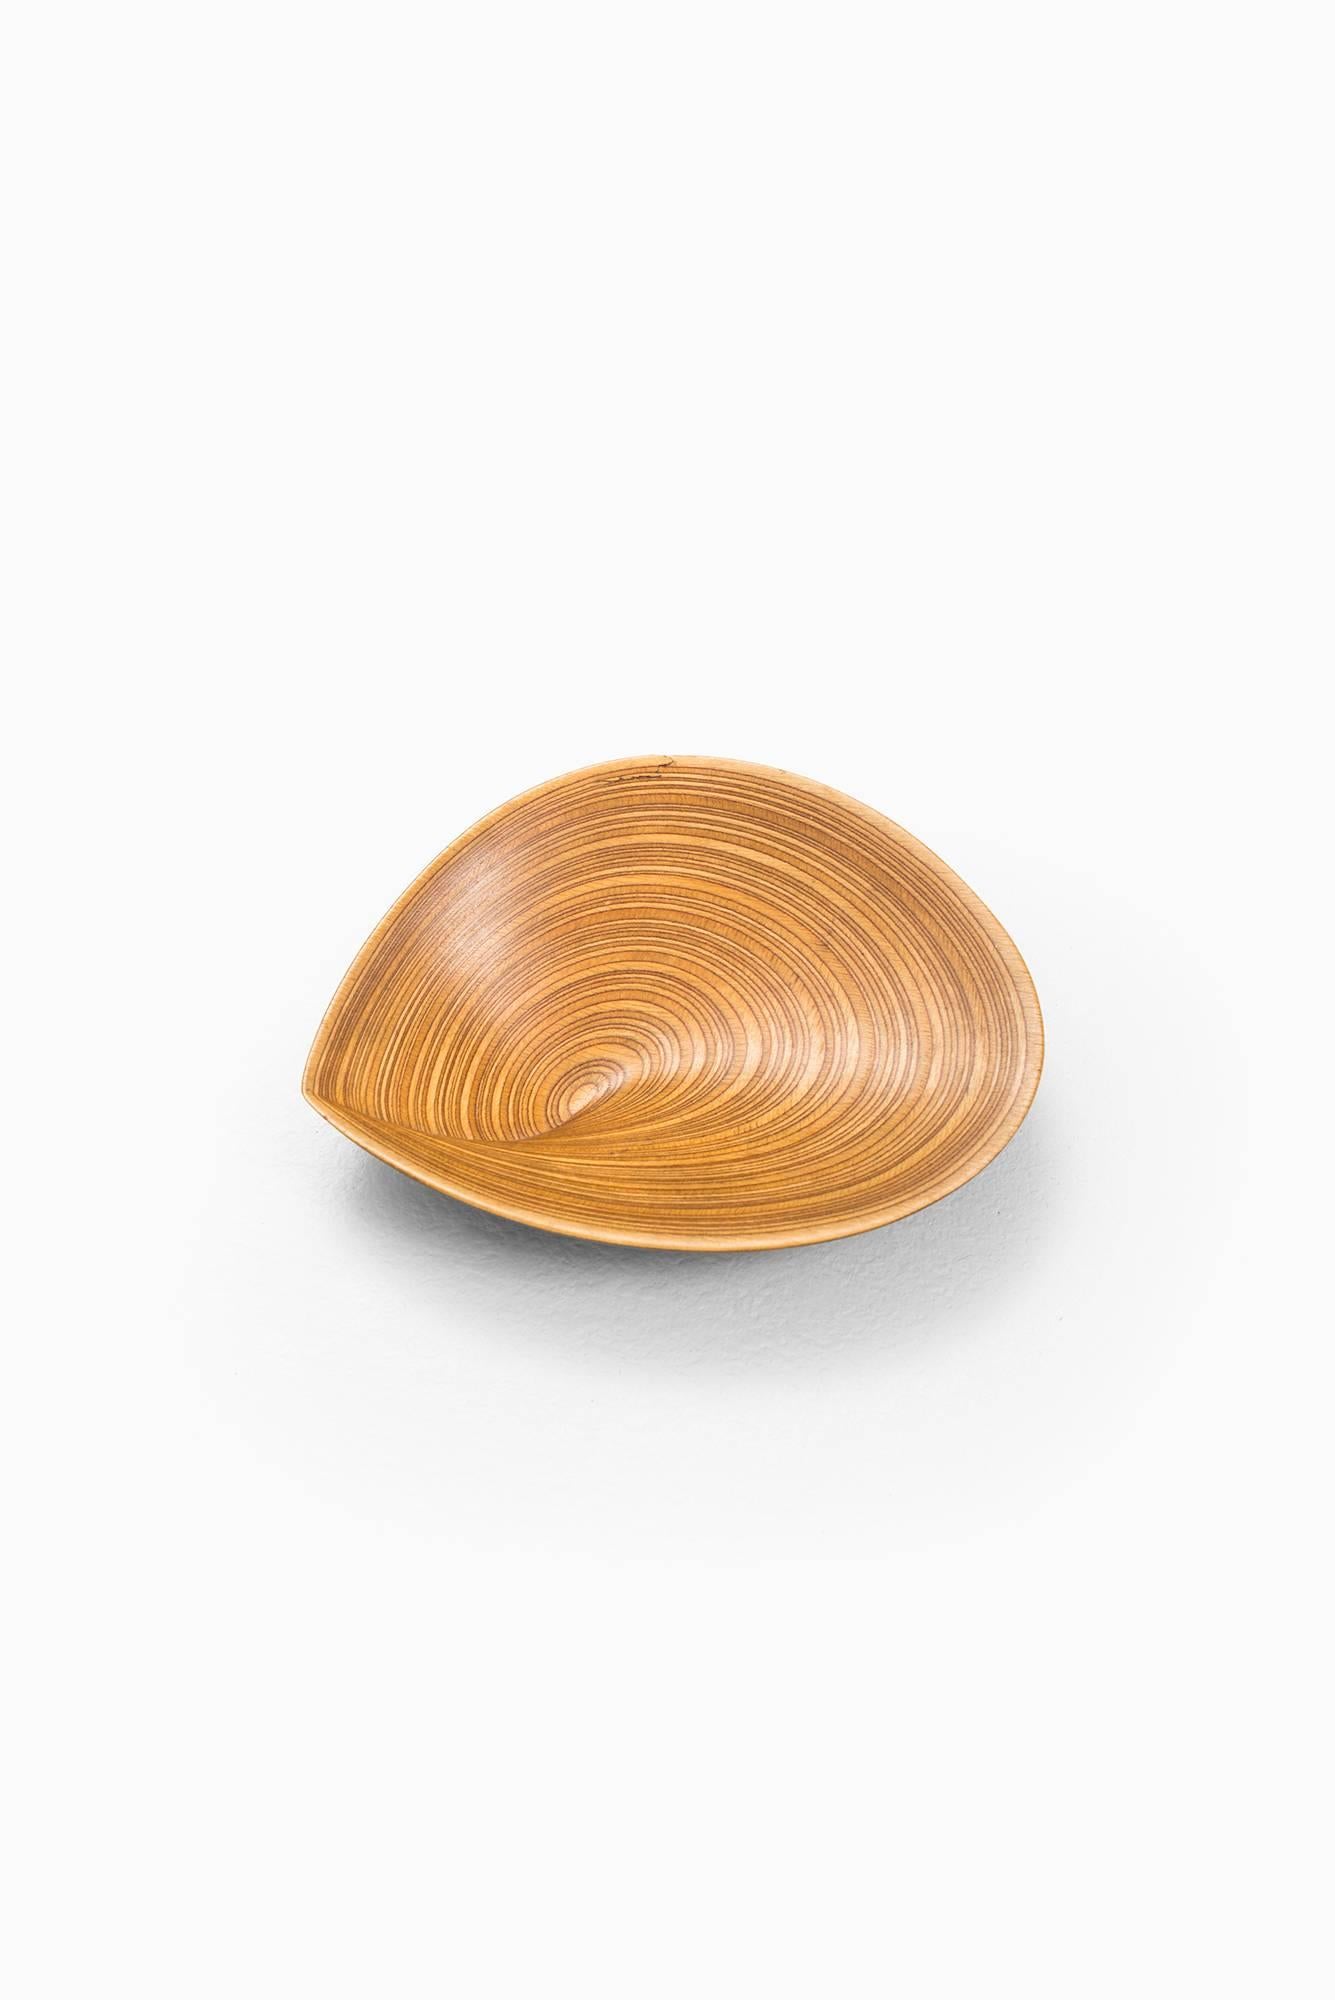 Rare dish designed by Tapio Wirkkala. Produced by Soinne et Kni in Finland.